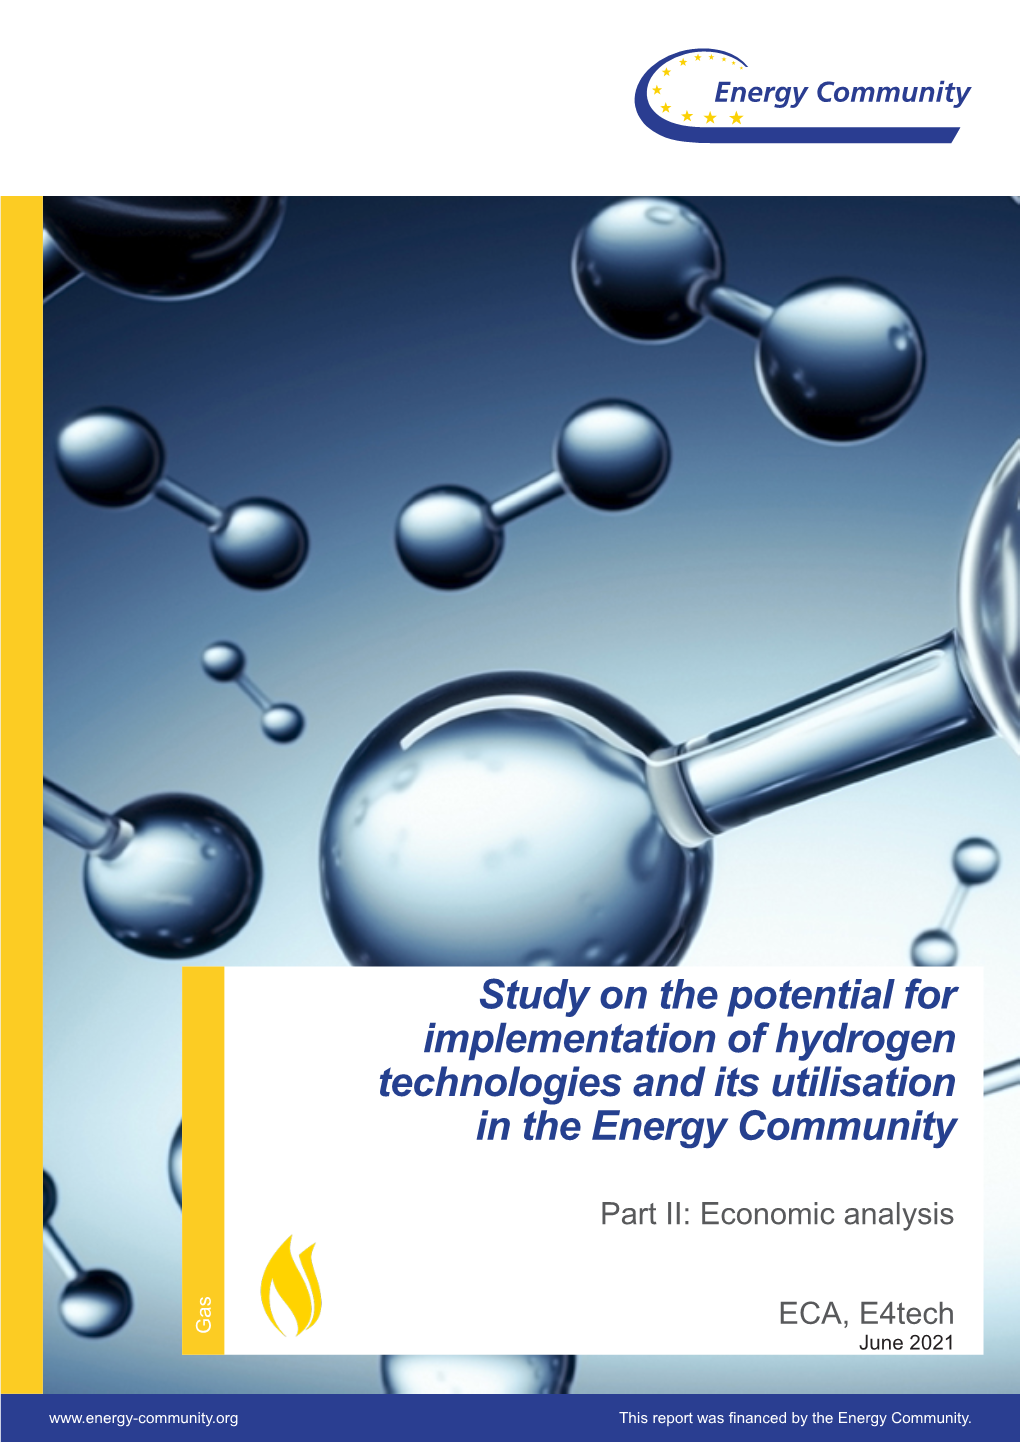 ECA, E4tech, Study on the Potential for Implementation of Hydrogen